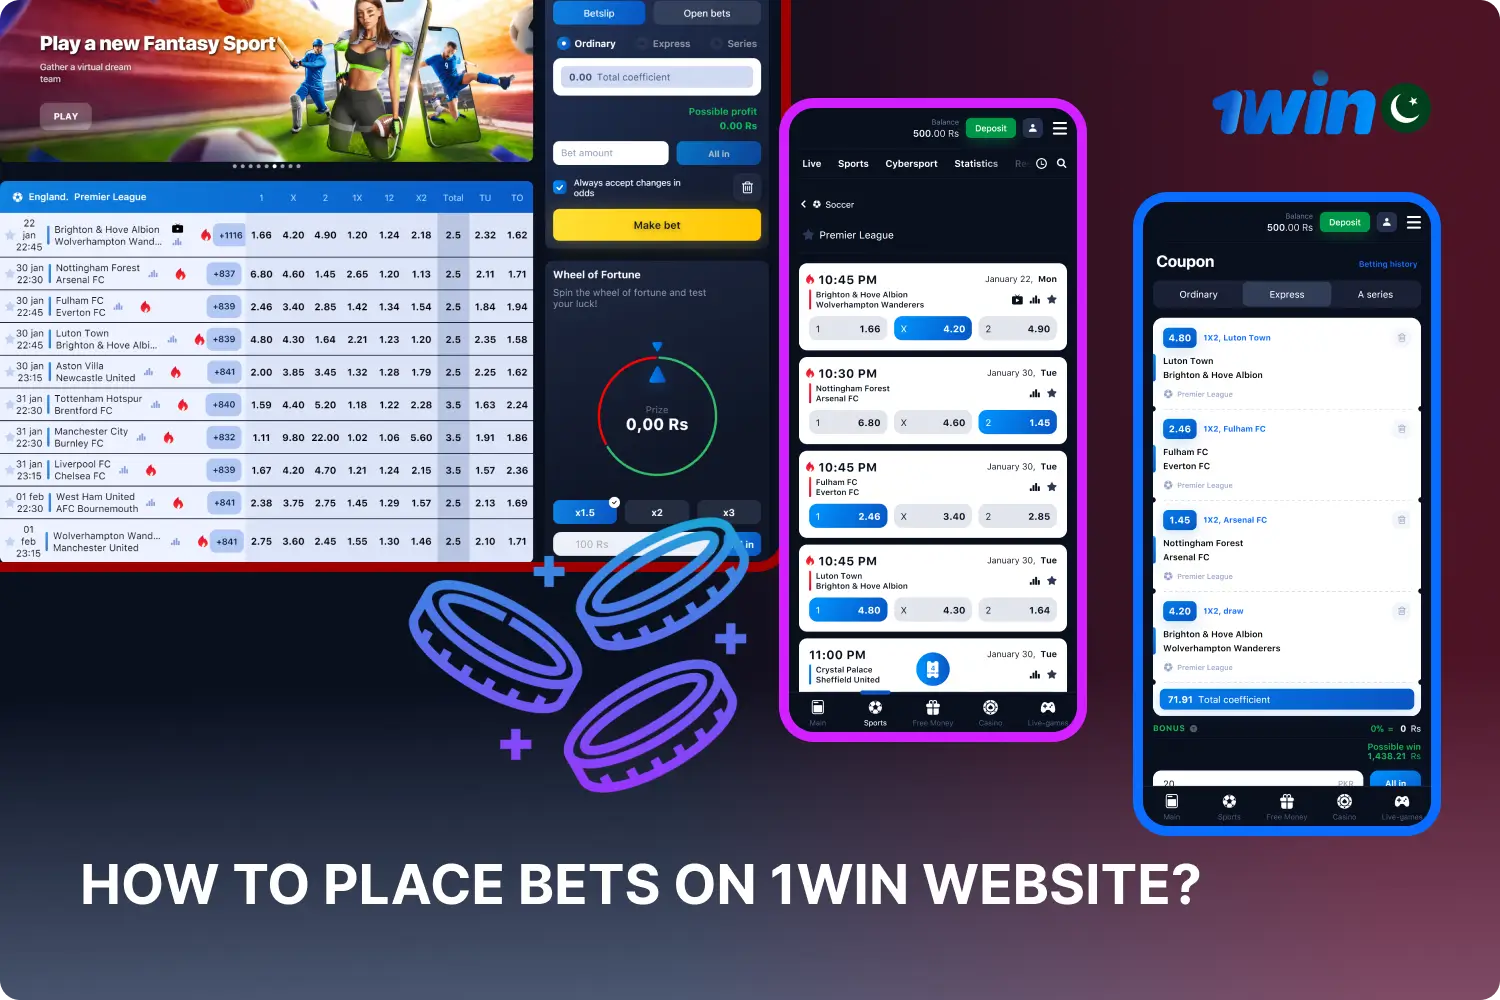 To bet at 1win, users from Pakistan need to register and make a deposit into their account, after which they can choose a sporting event of their choice to bet on